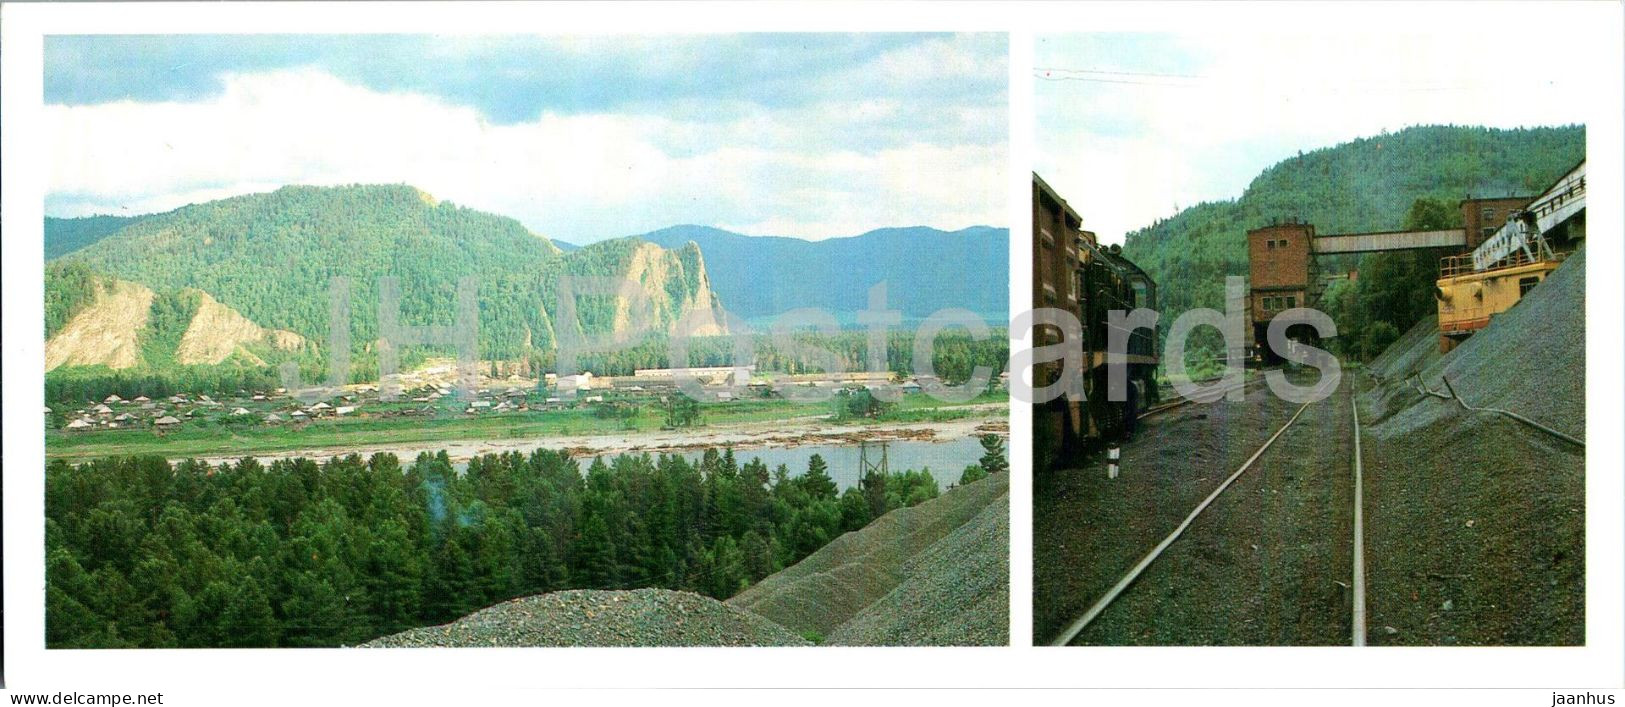 Abaza - View At The Town - Shipment Of Iron Ore Concentrate - Khakassia - 1986 - Russia USSR - Unused - Rusland